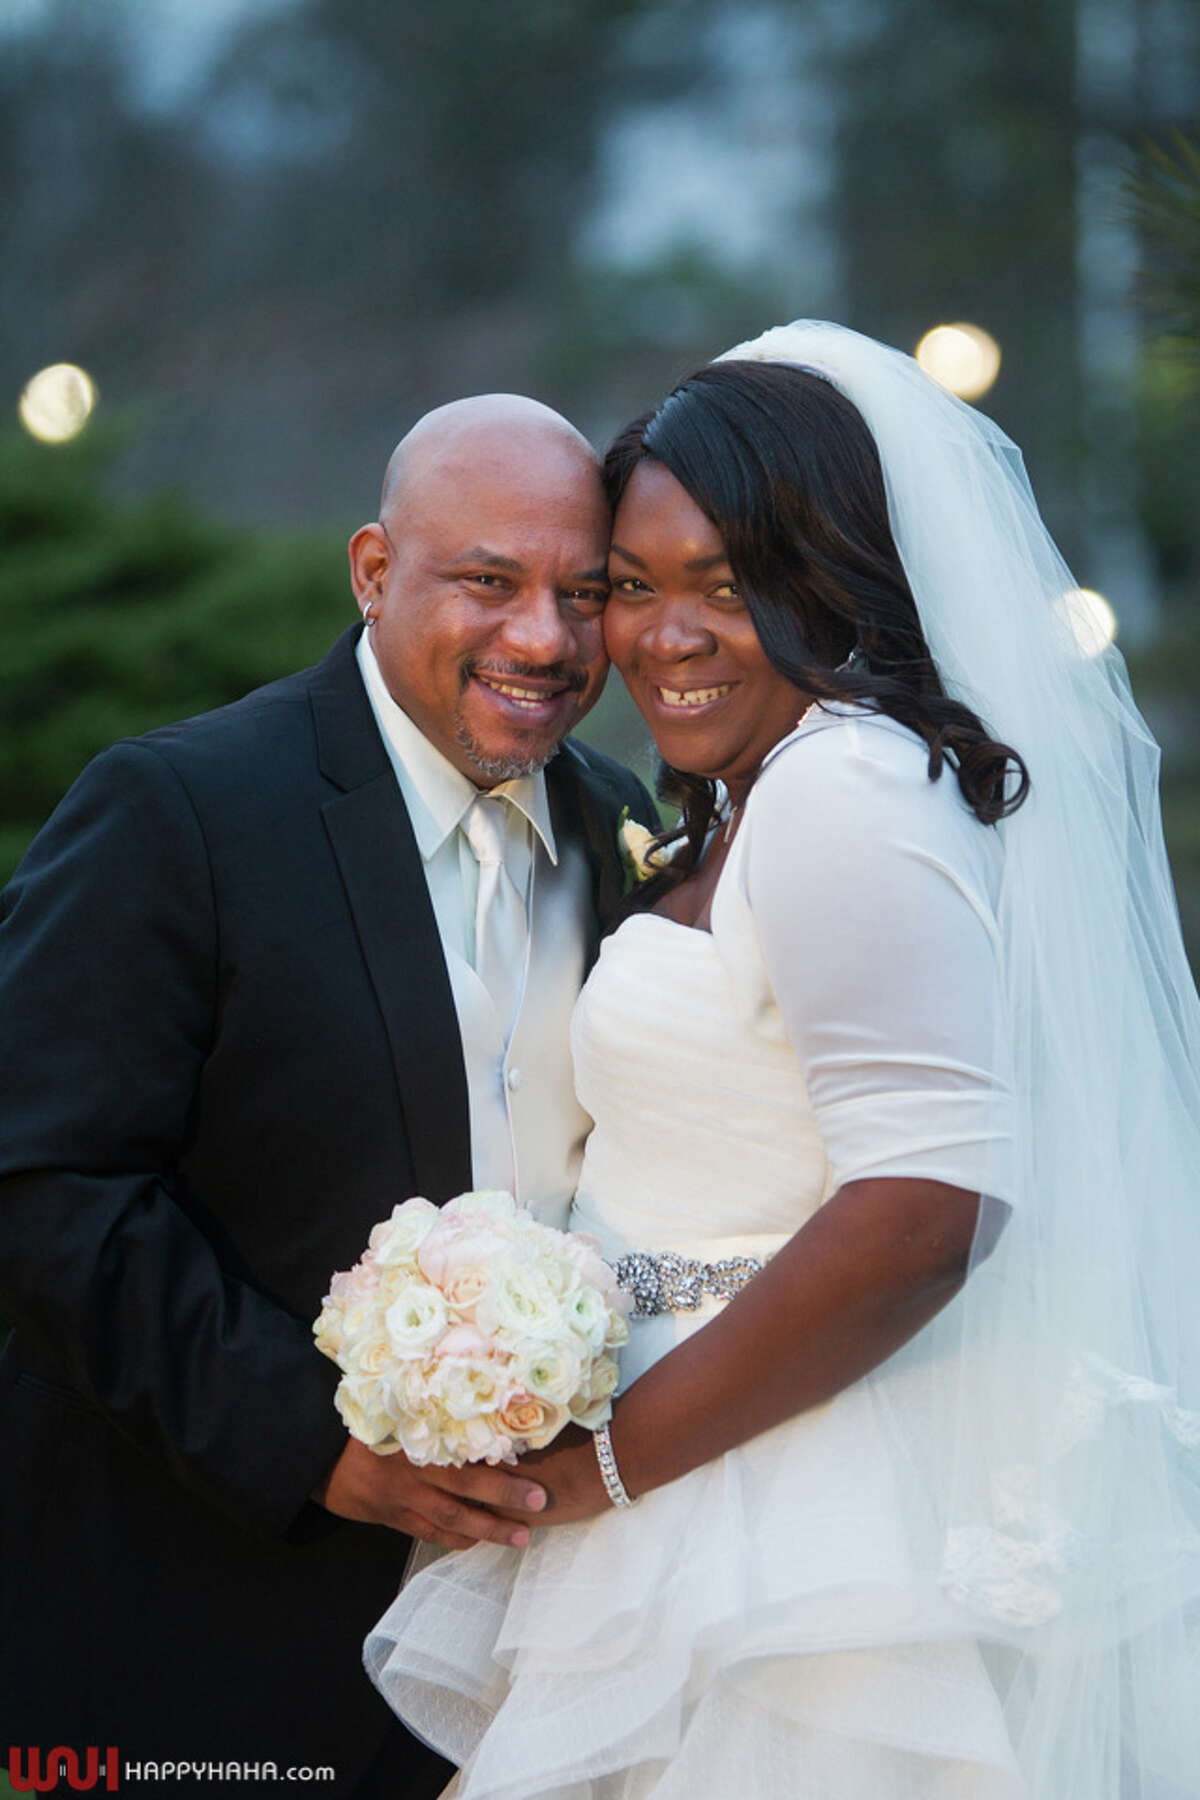 Charmaine Mercedes Davis, daughter of Elisha and Beatrice Davis of Stamford, married Lawrence Benson Ford, Sr, at the Stamford Marriott Hotel & Spa in January.